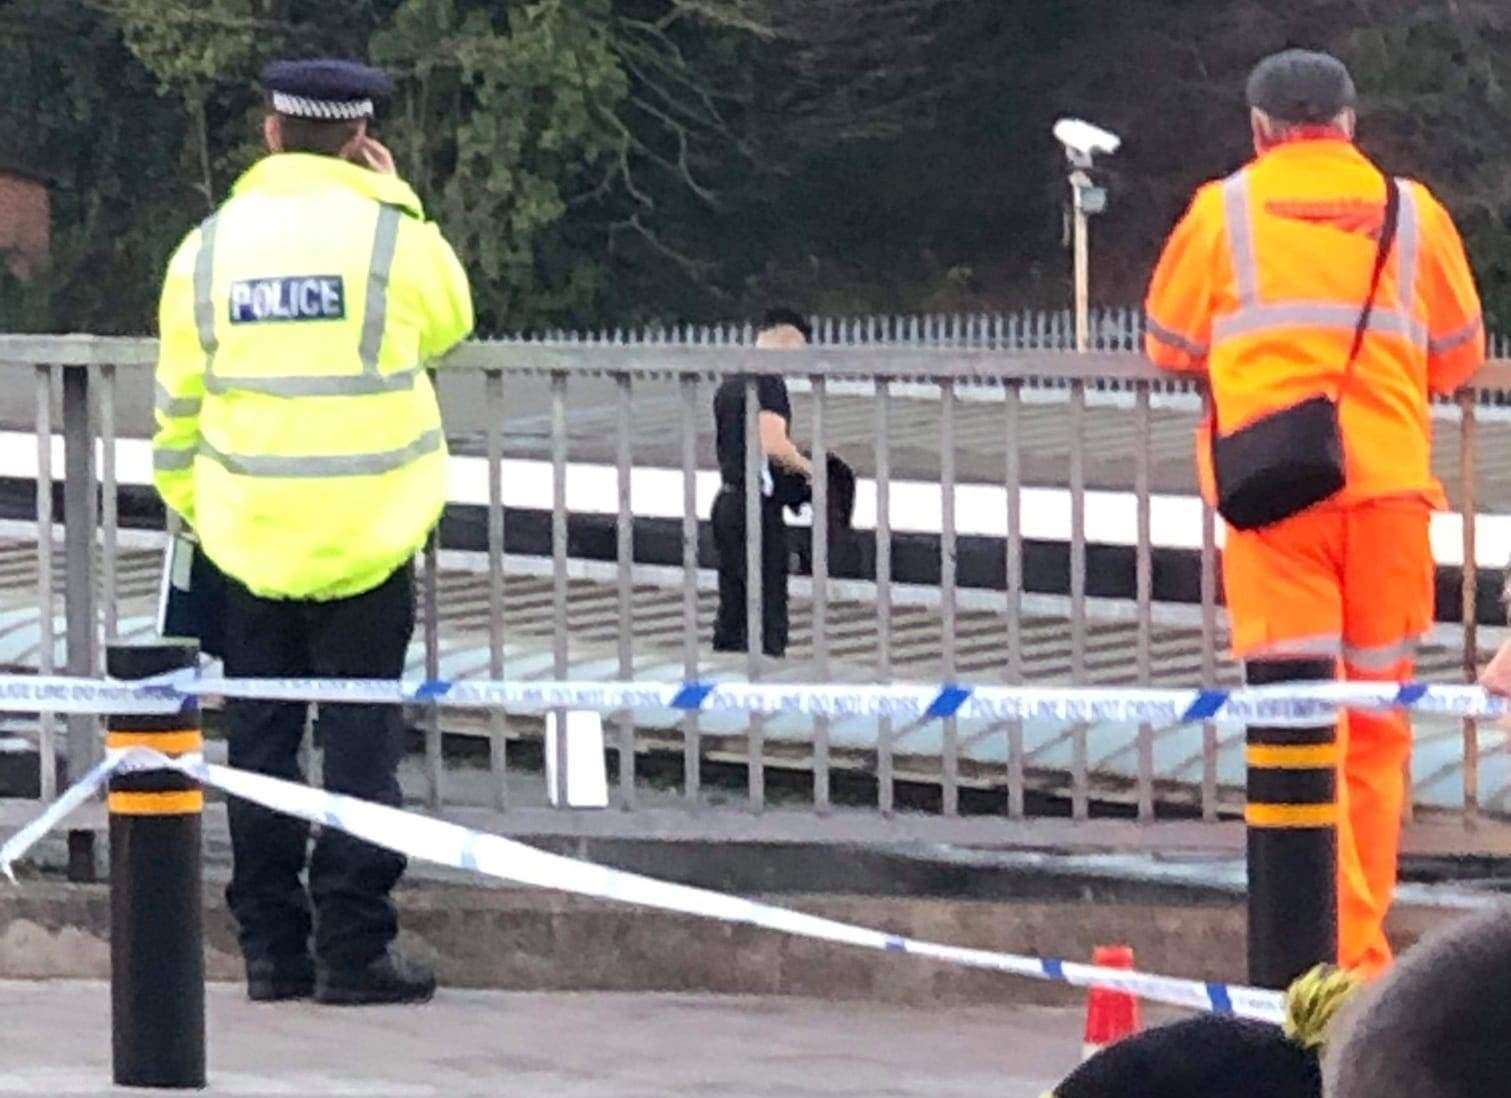 Emergency services were called to Chatham railway station after a man was spotted on the roof. Picture: Charlotte Barritt